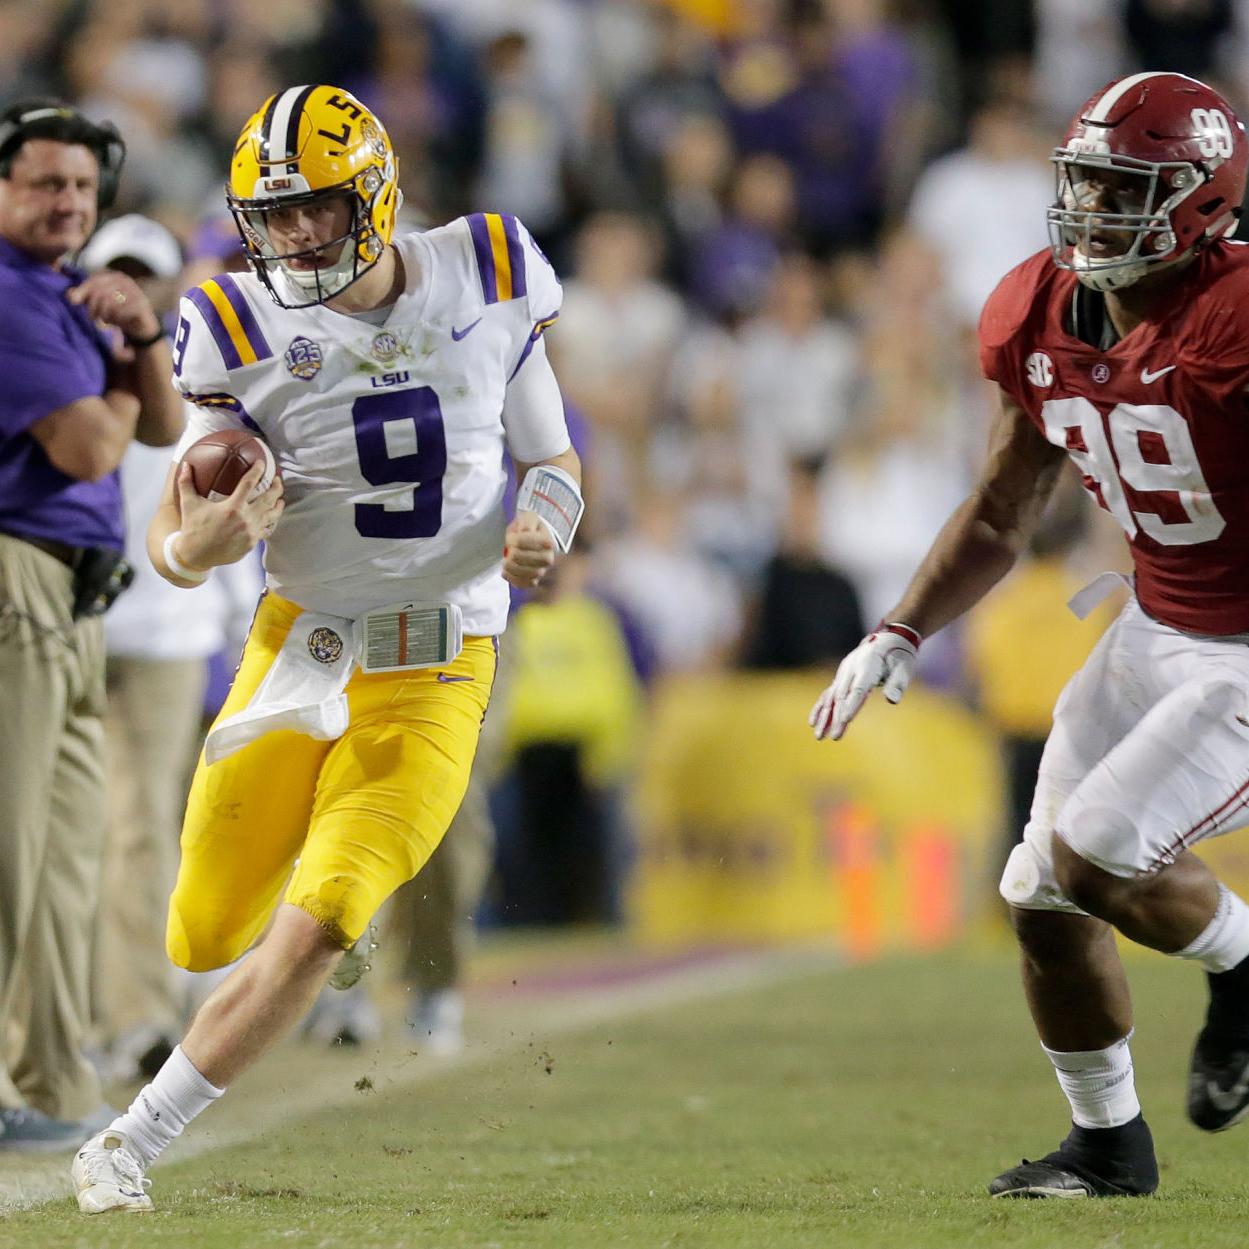 Espn Ranked The Top 25 Players In The Lsu Alabama Showdown